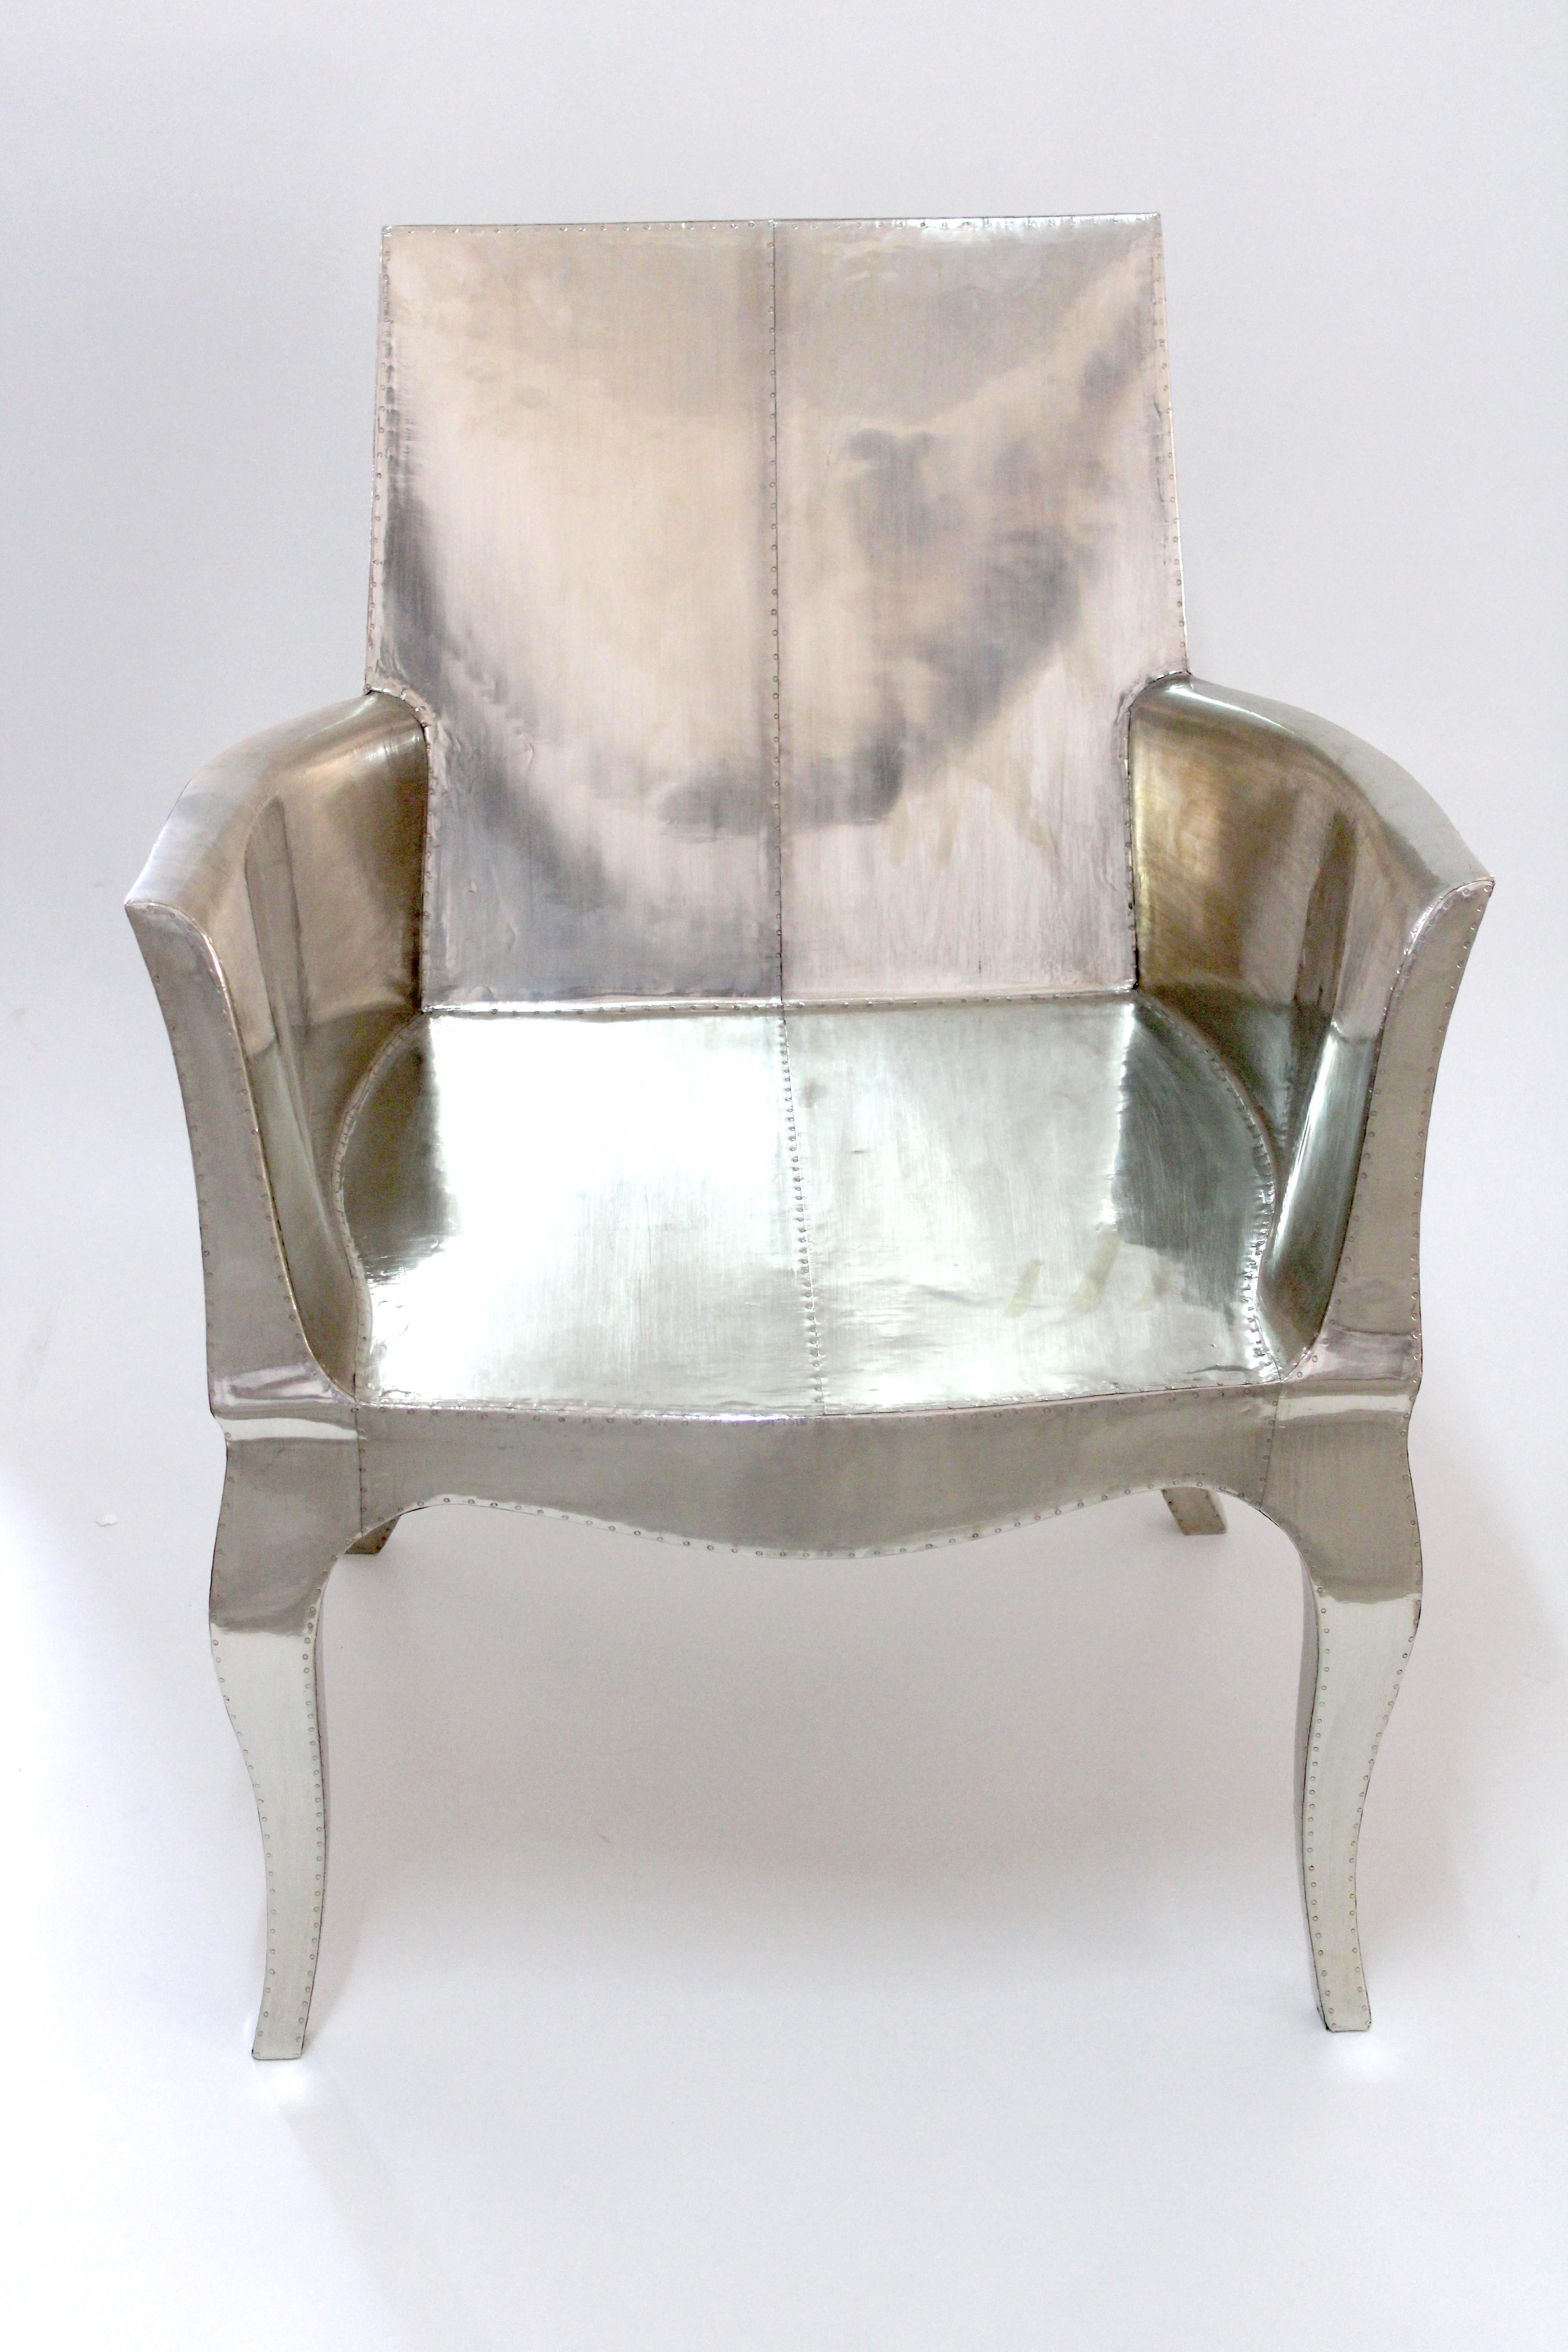 Contemporary Art Deco Dining Chairs Smooth White Bronze by Paul Mathieu for S. Odegard For Sale